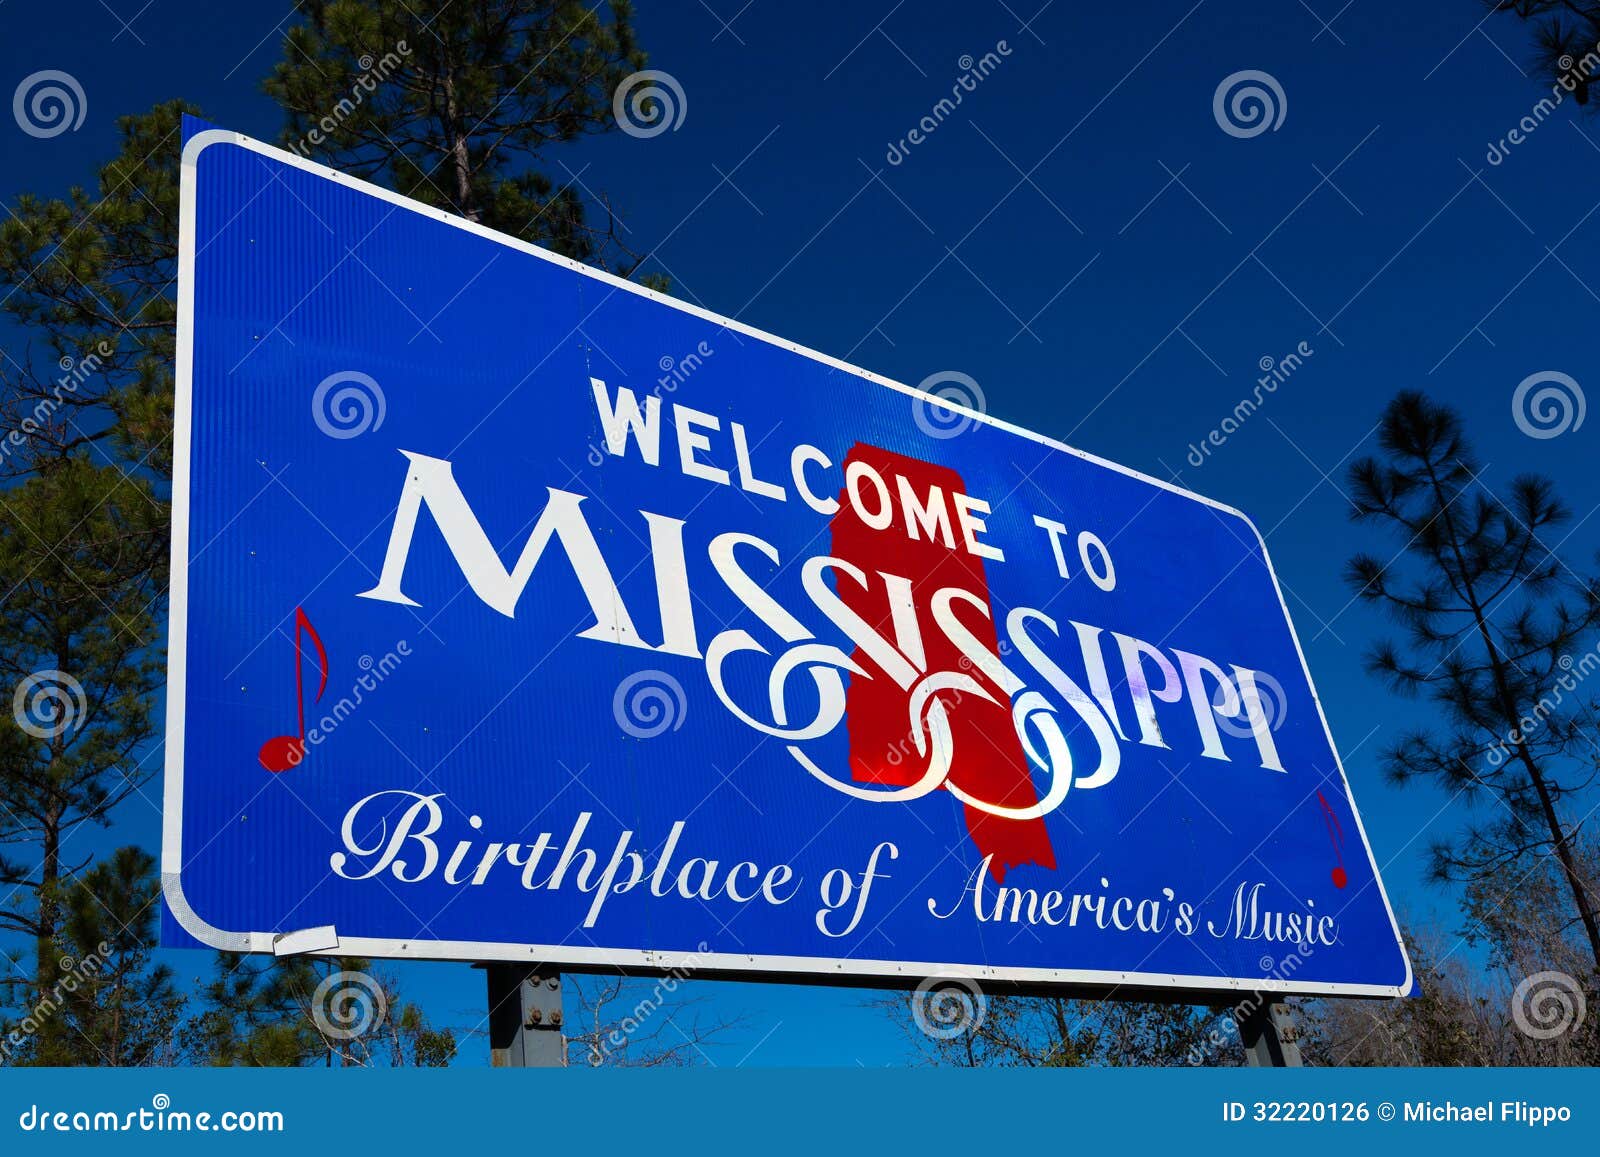 welcome to mississippi state road sign